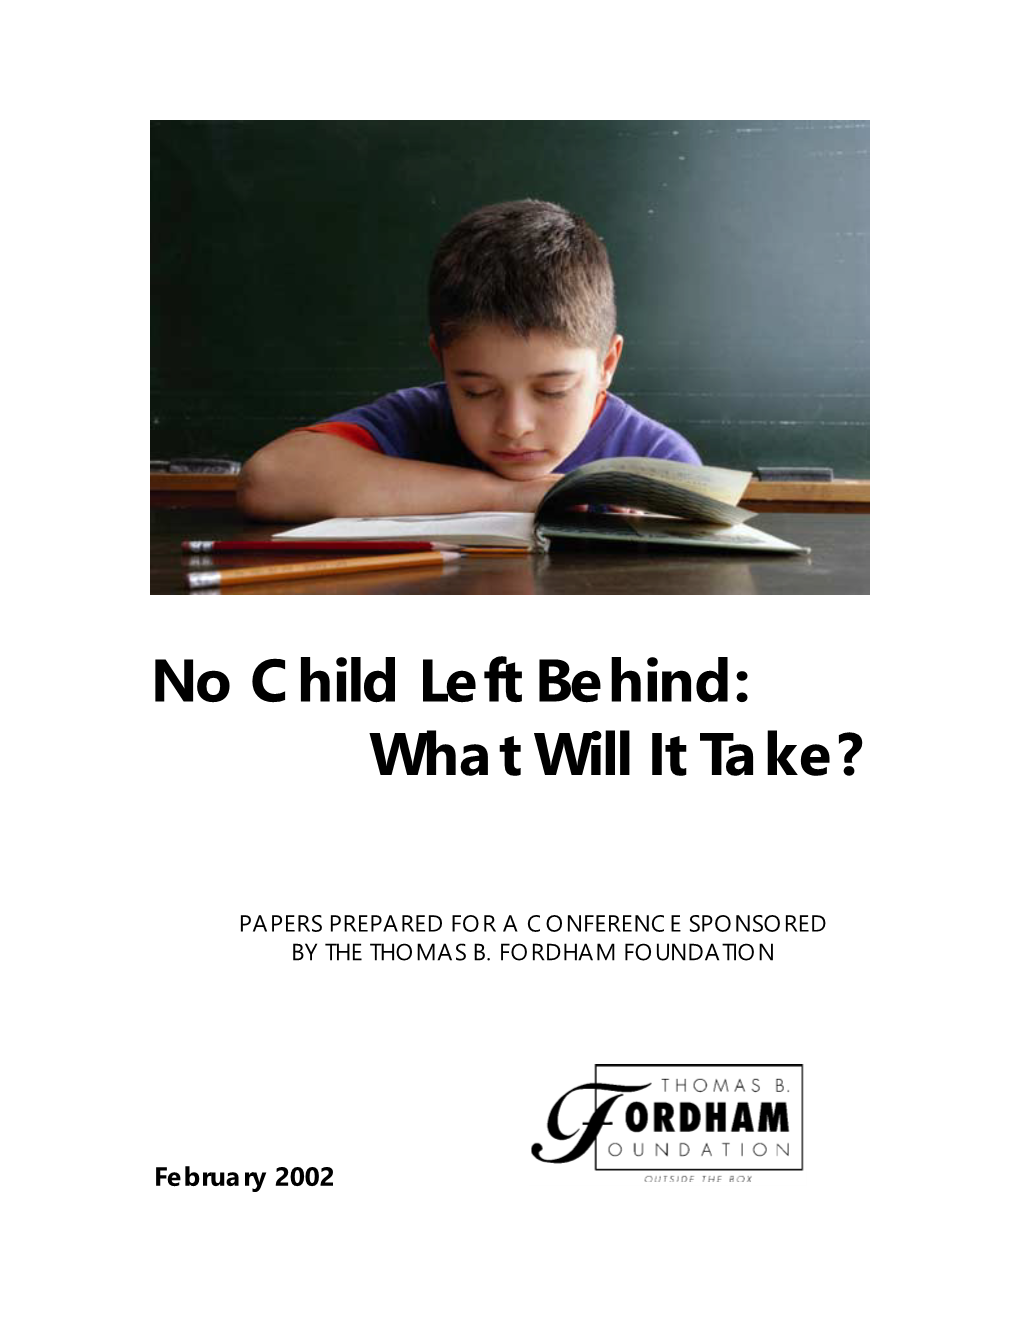 No Child Left Behind: What Will It Take?